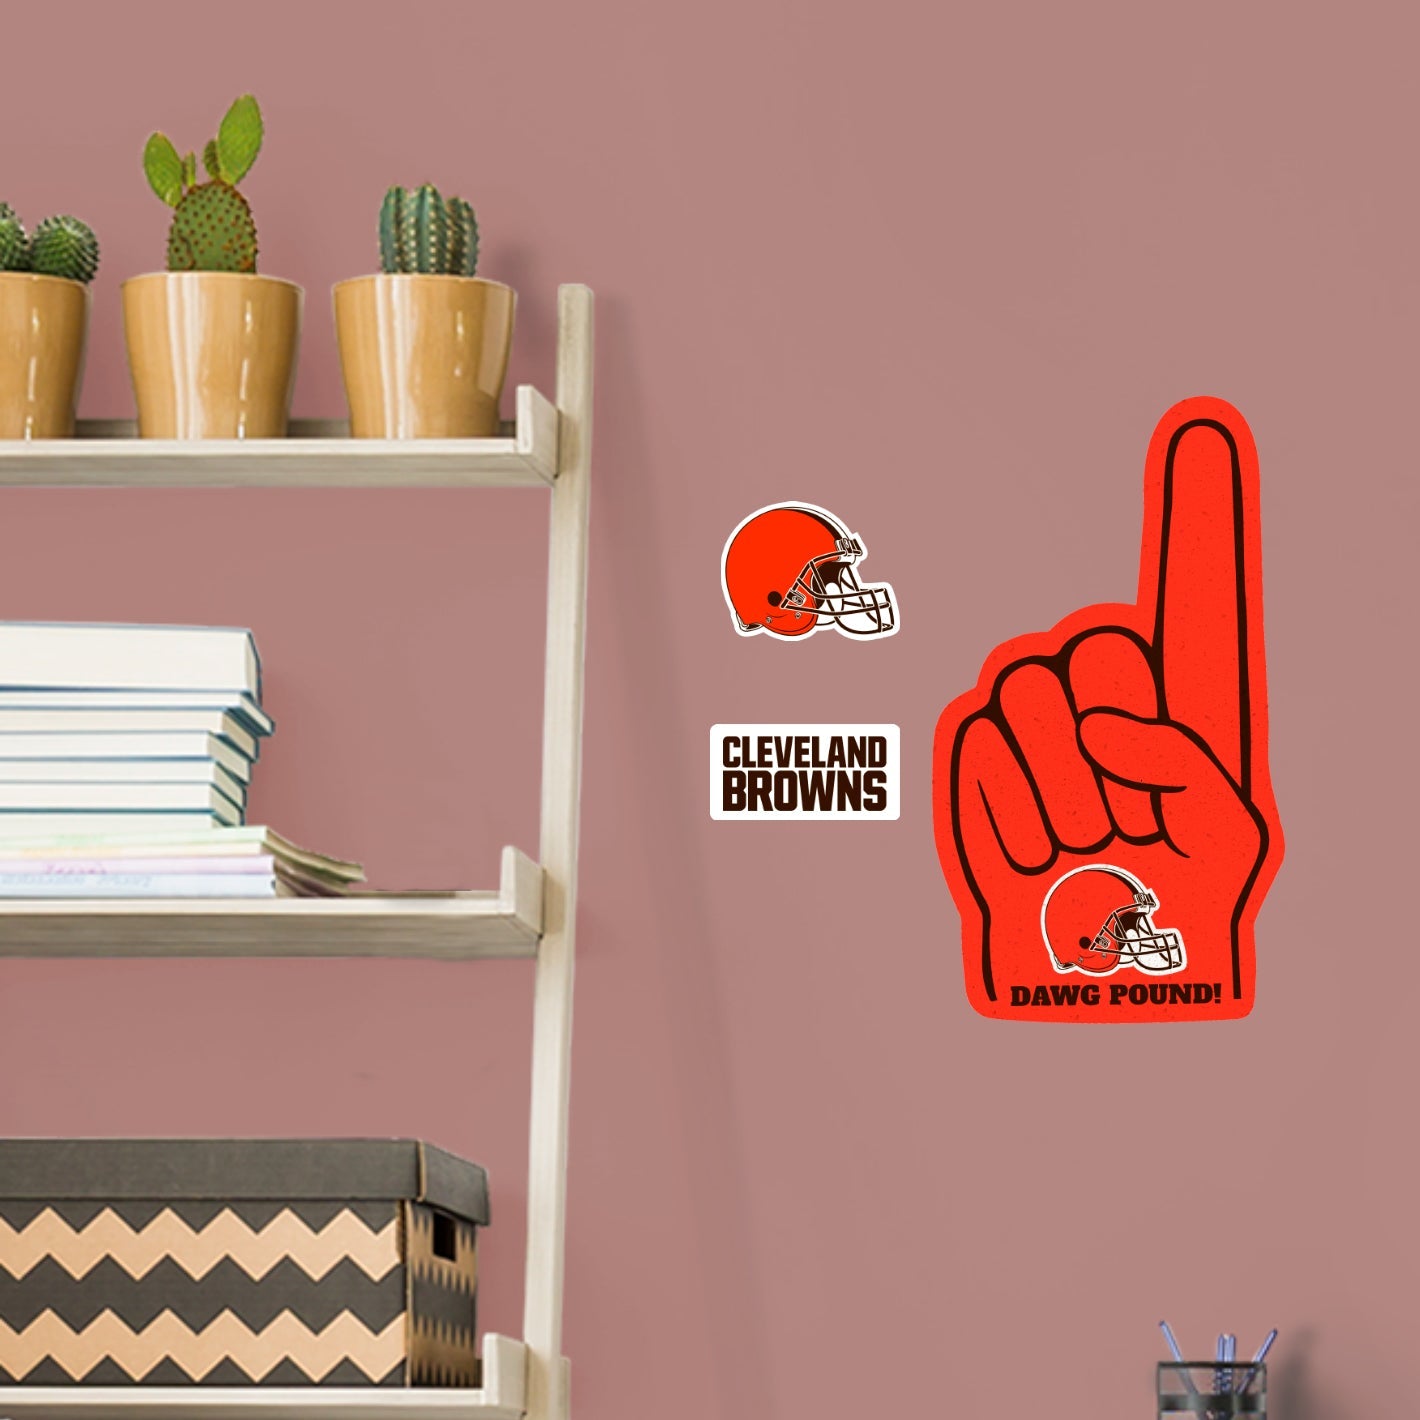 Cleveland Browns: Foam Finger - Officially Licensed NFL Removable Adhesive Decal